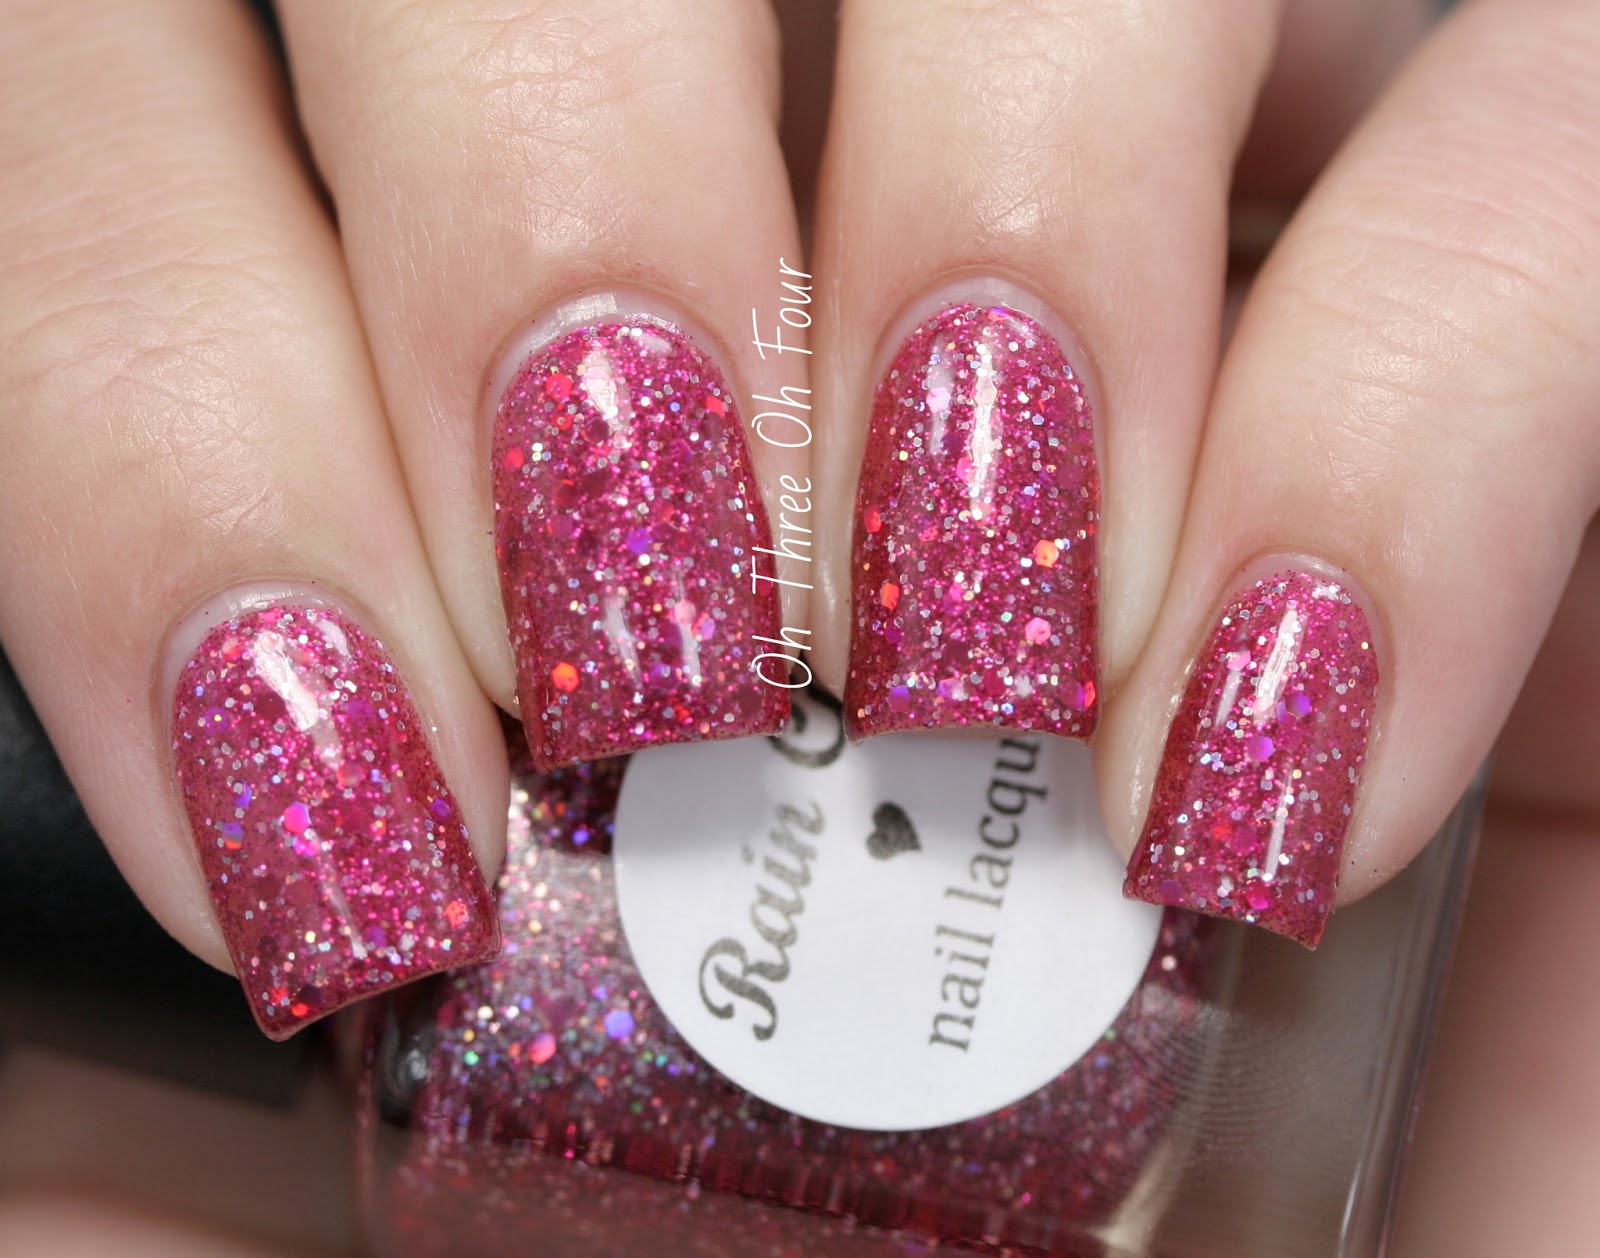 Rain City Lacquer Siren's Song swatch